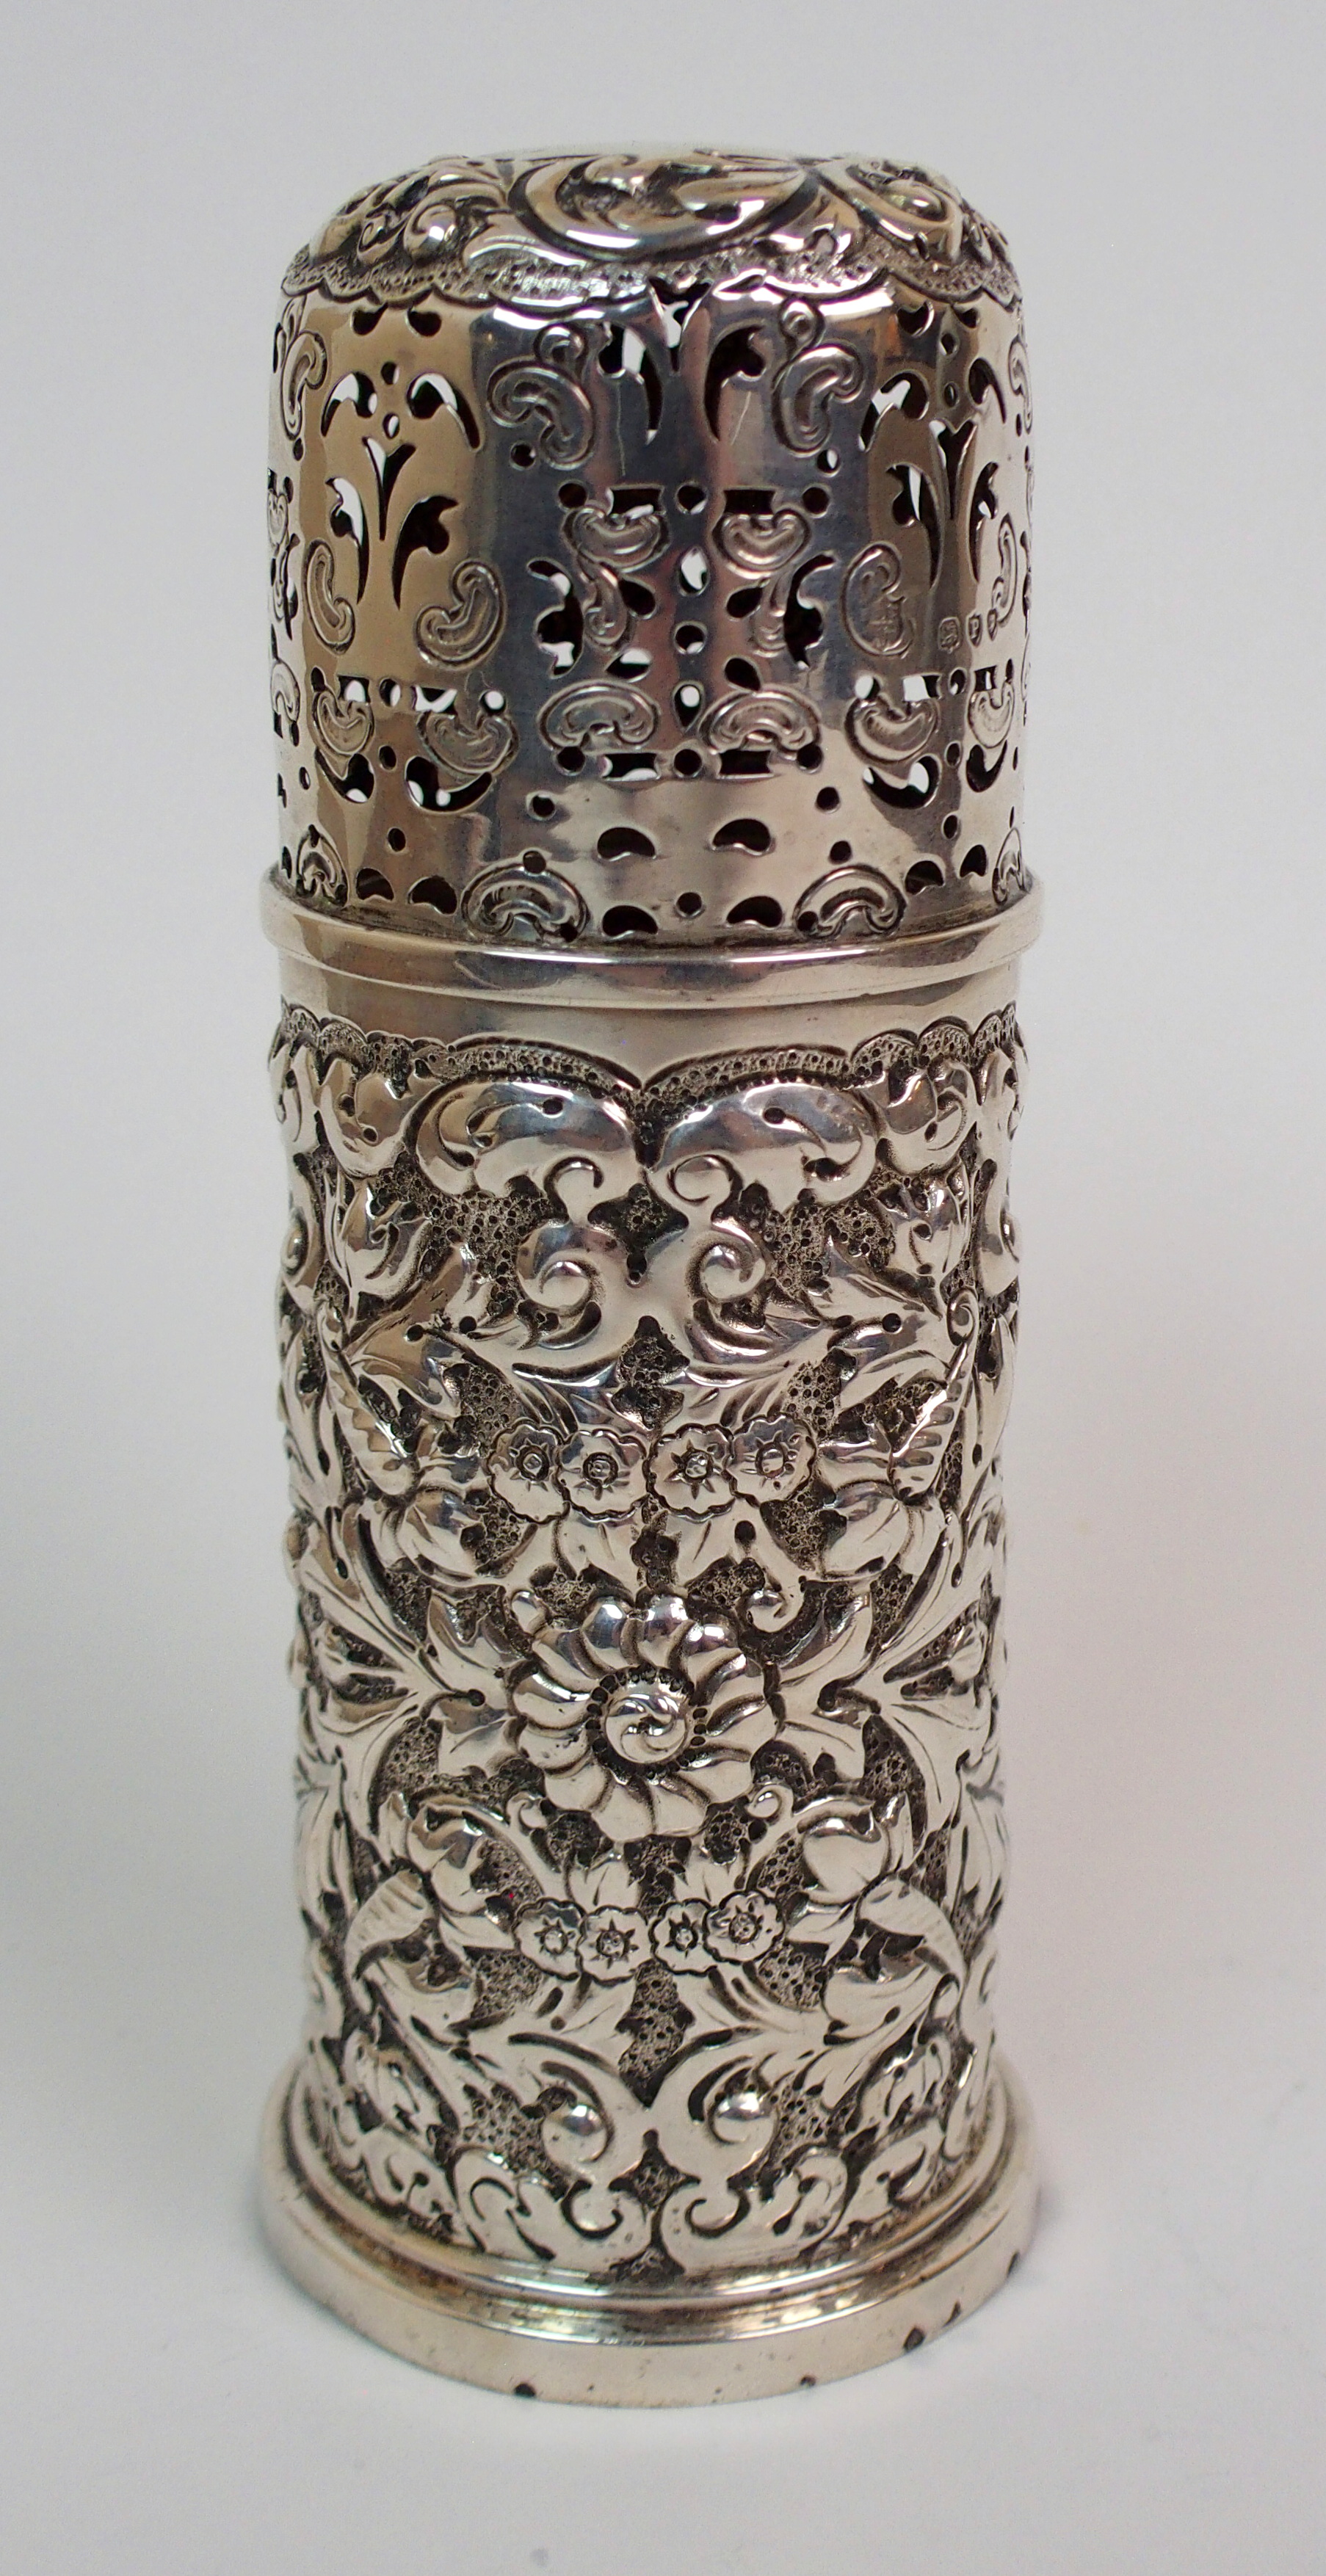 A VICTORIAN SILVER SUGAR CASTOR by Horace Woodward & Co., (Edgar Finley and Hugh Taylor), London - Image 4 of 10